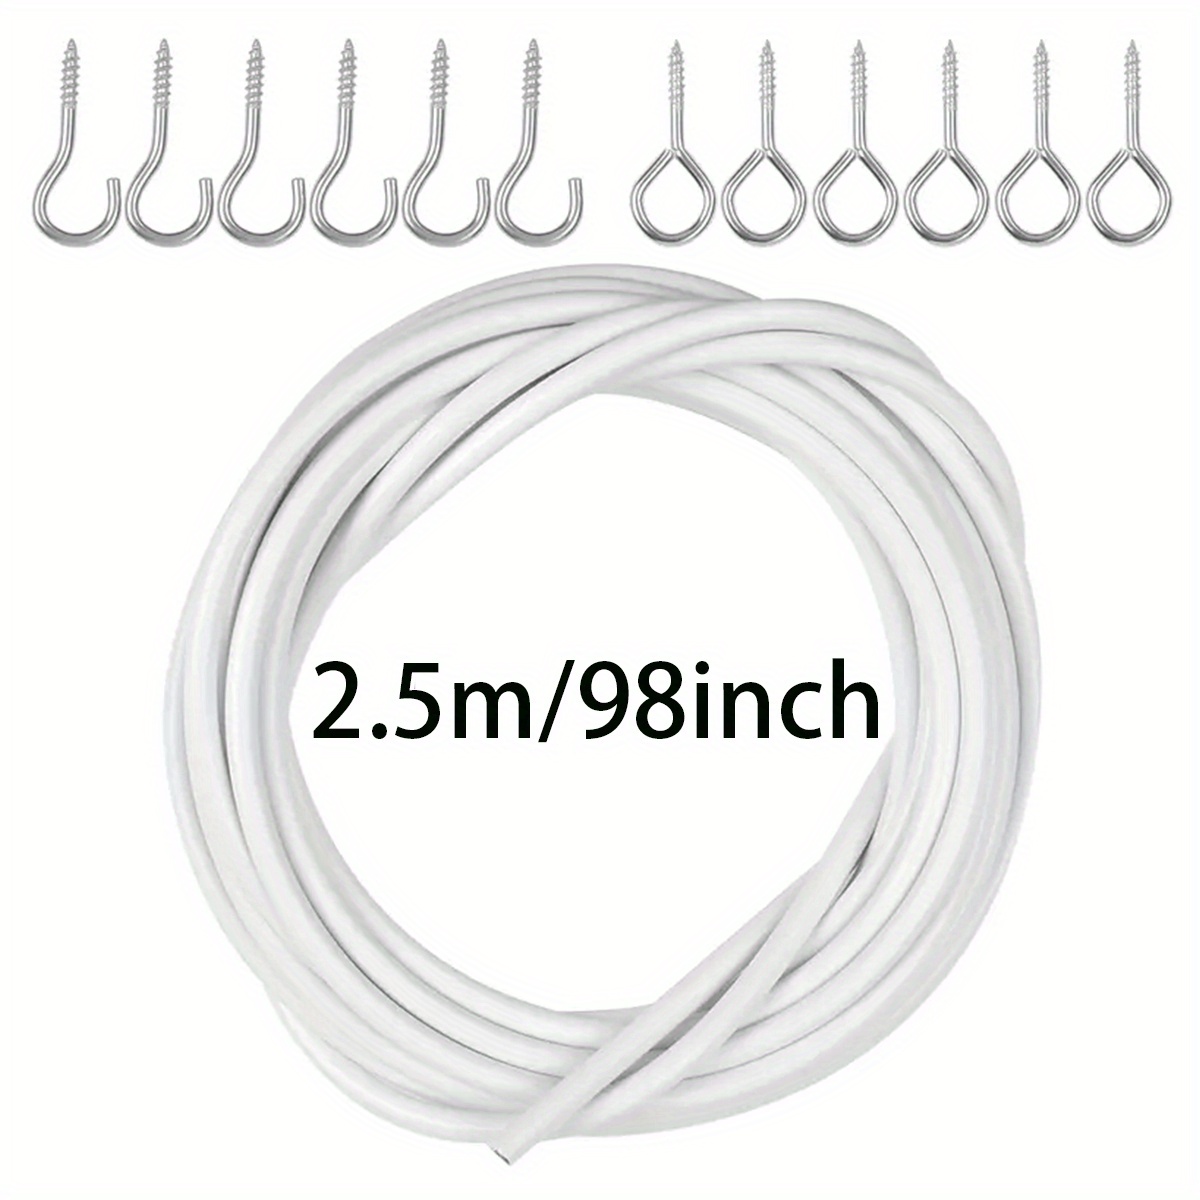 Plastic Coated Picture Wire - Buy Stainless Steel Picture Hanging Wire